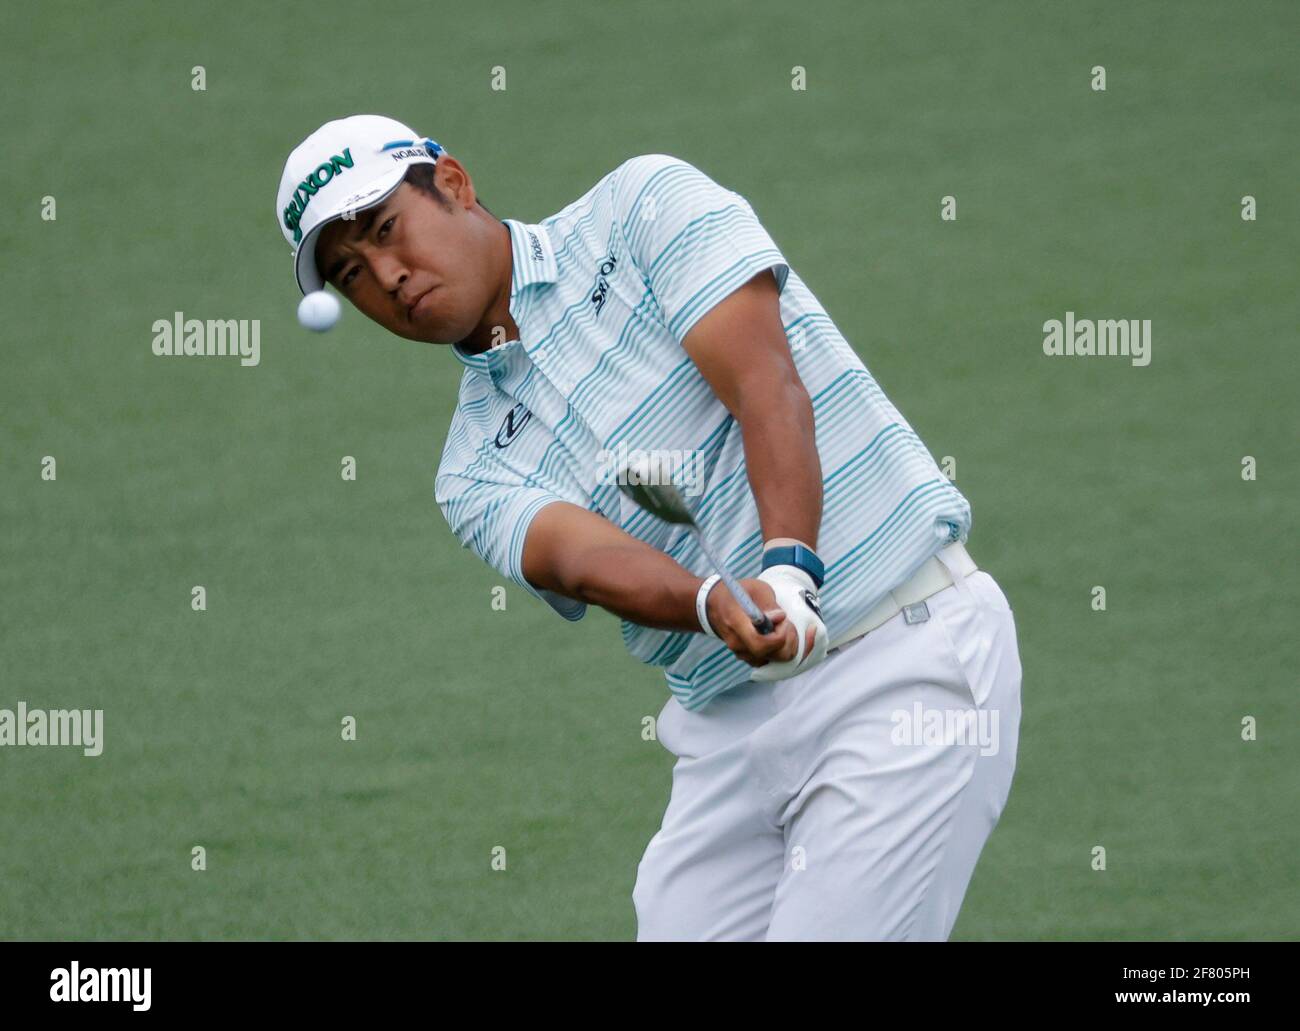 Golf - The Masters - Augusta National Golf Club - Augusta, Georgia, U.S. - April 10, 2021 Japan's Hideki Matsuyama chips onto the 2nd green during the third round REUTERS/Brian Snyder Stock Photo